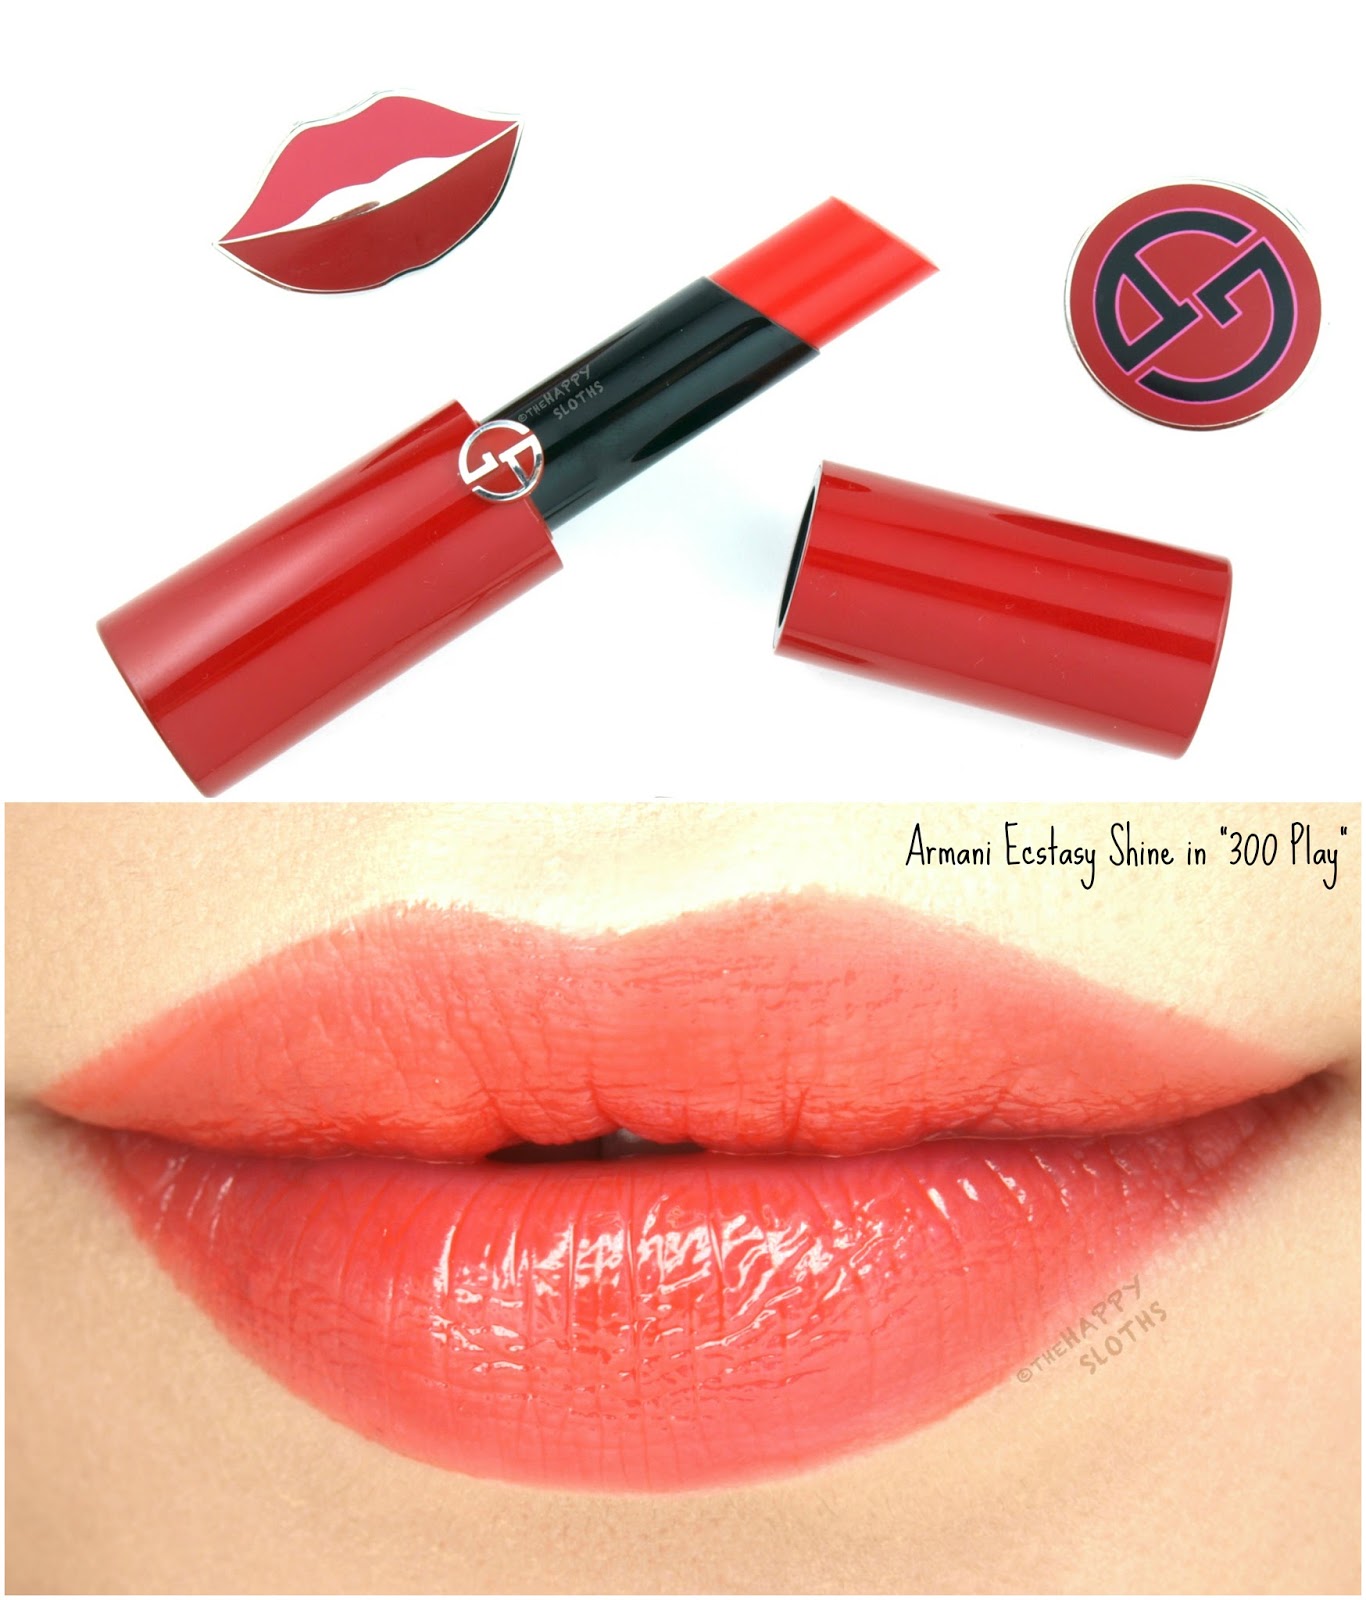 Giorgio Armani Beauty Ecstasy Shine Lipstick in "300 Play": Review and Swatches